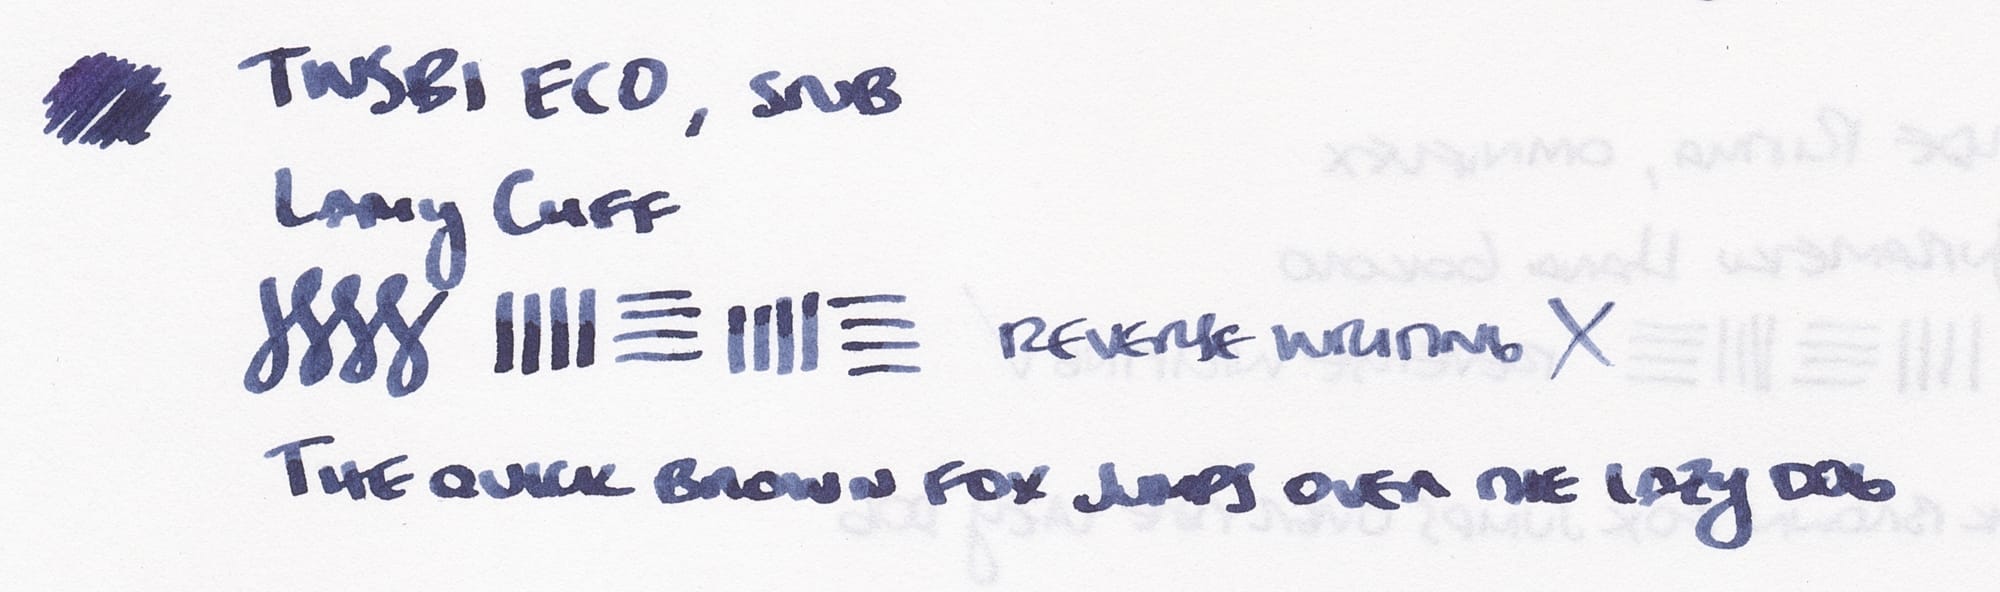 Writing sample using a TWSBI ECO fountain pen with a stub nib, listing the pen name, ink name, some figure-8s, horizontal and vertical lines, demonstration of reverse writing, and "The quick brown fox jumps over the lazy dog"